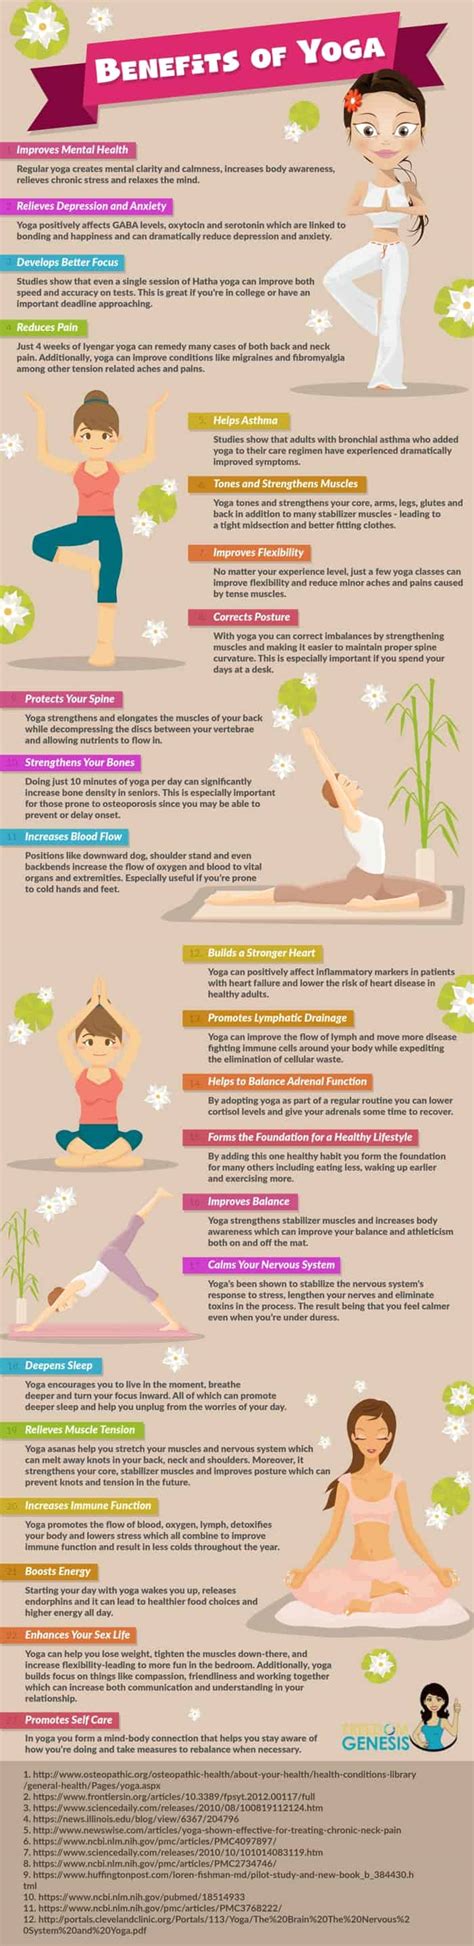 The Most Powerful Benefits Of Yoga With Infographic